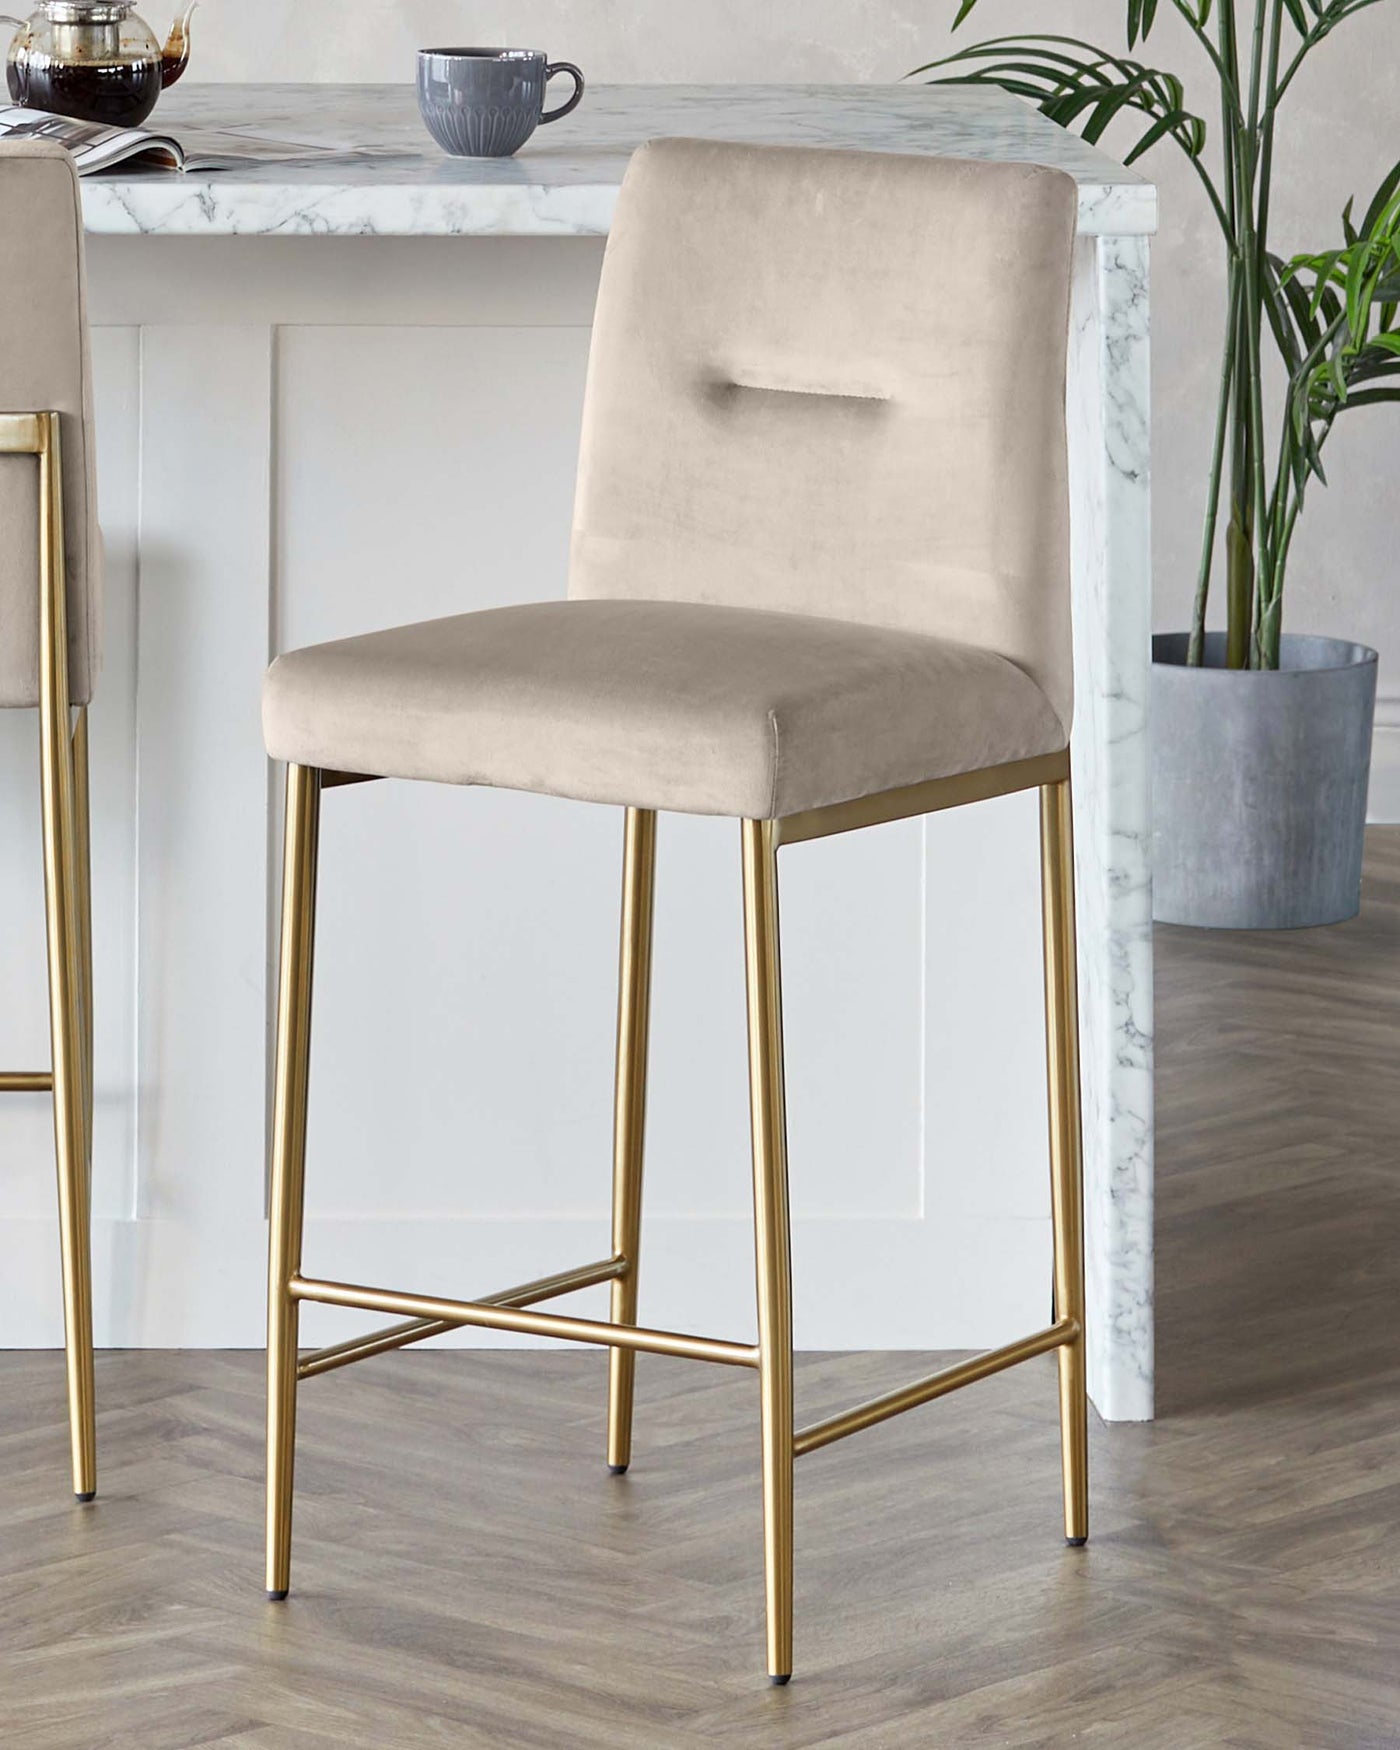 Elegant modern bar stool featuring a beige velvet upholstered seat and backrest with a convenient handle cut-out, complemented by sleek gold-finished metal legs in a geometric design.